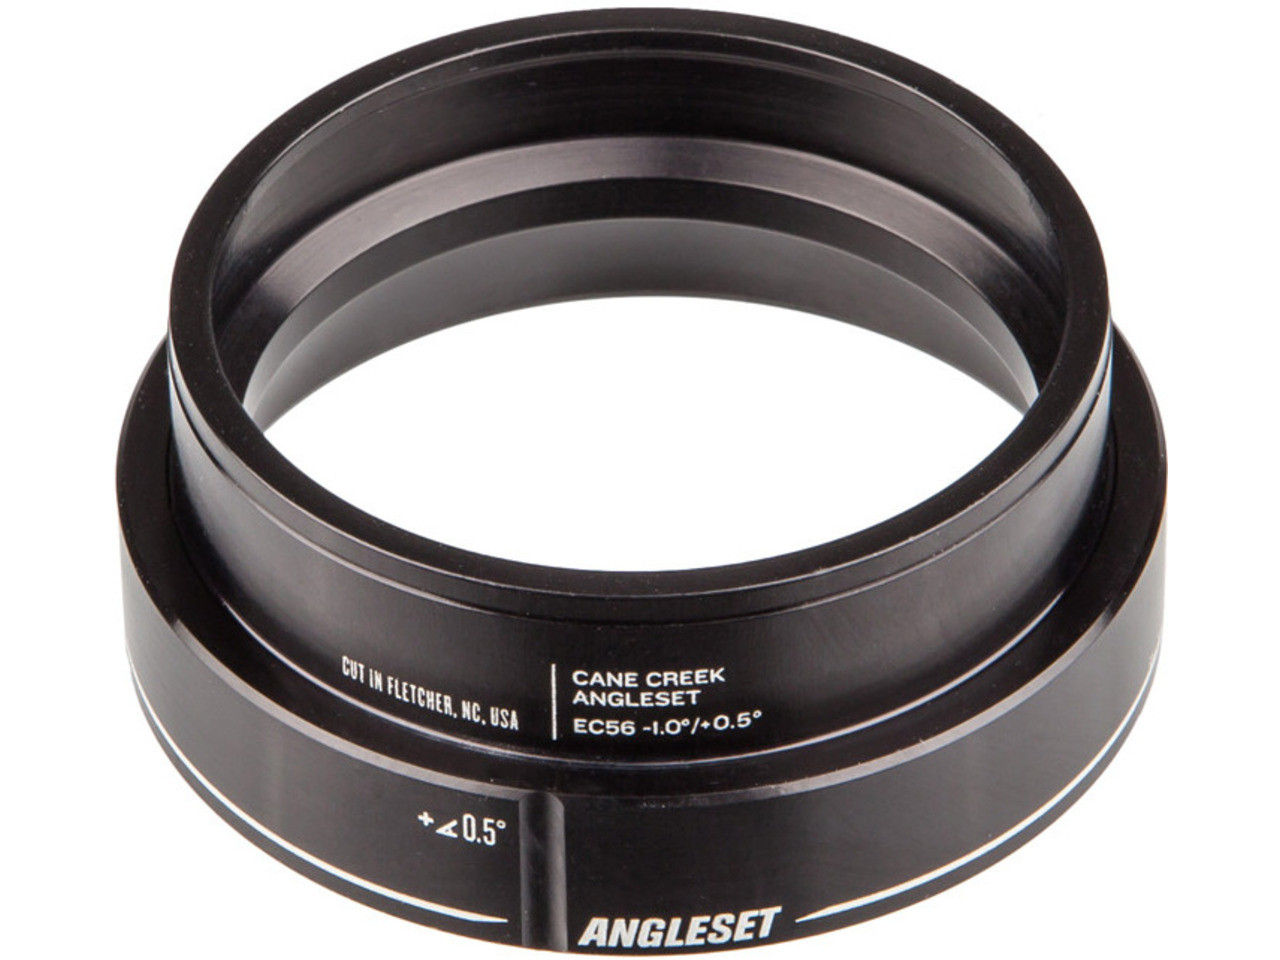 Cane Creek AngleSet EC56 Lower Cup